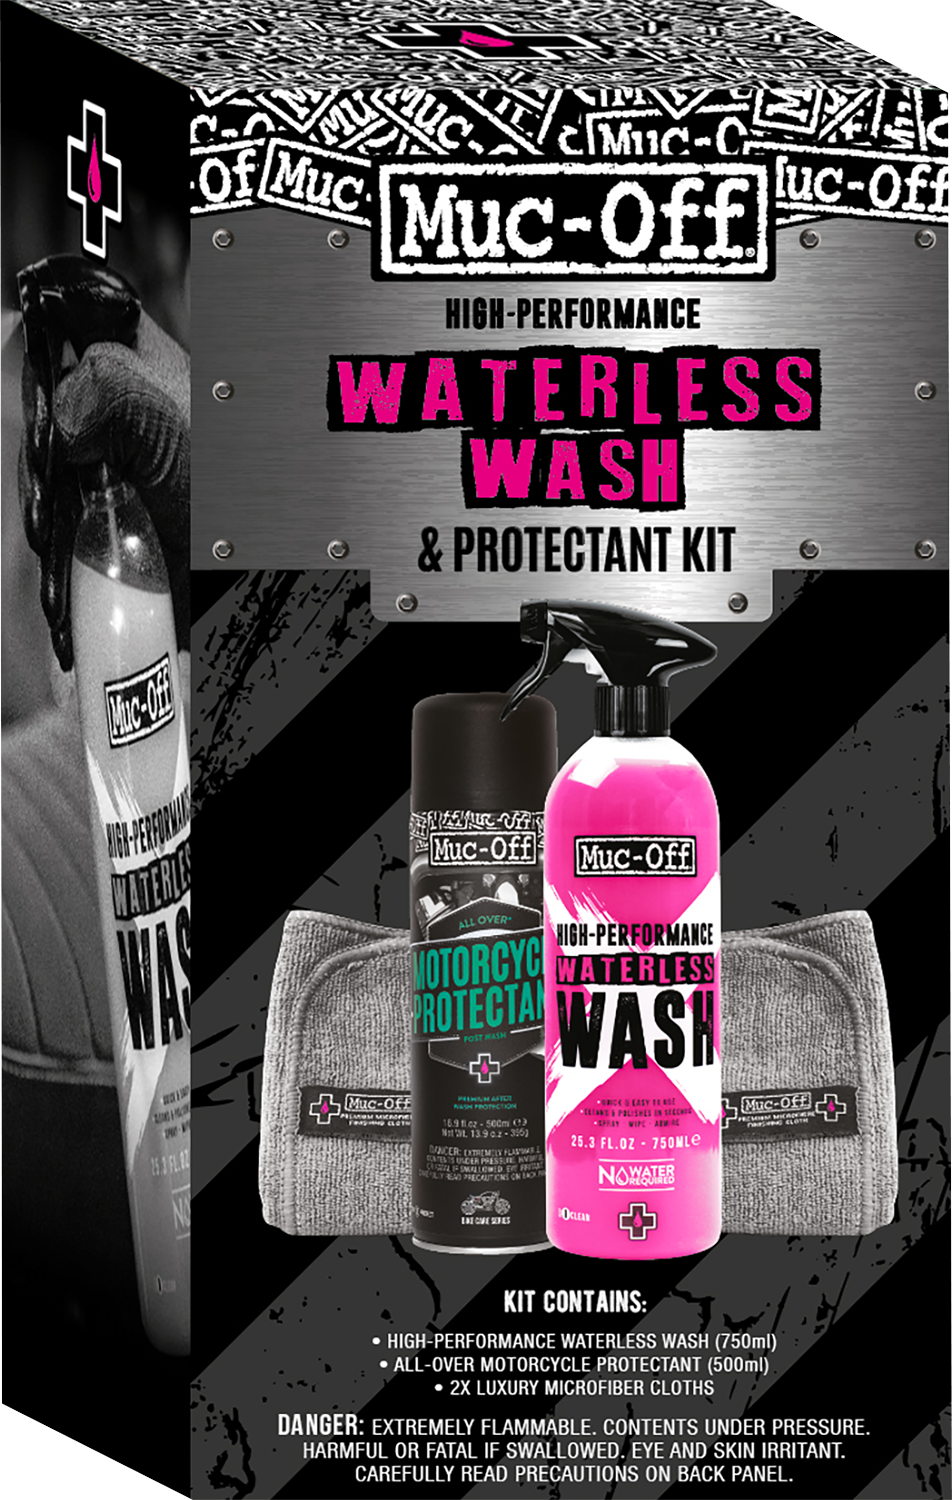 MUC-OFF USA Motorcycle Waterless Wash & Protectant Kit 20029US